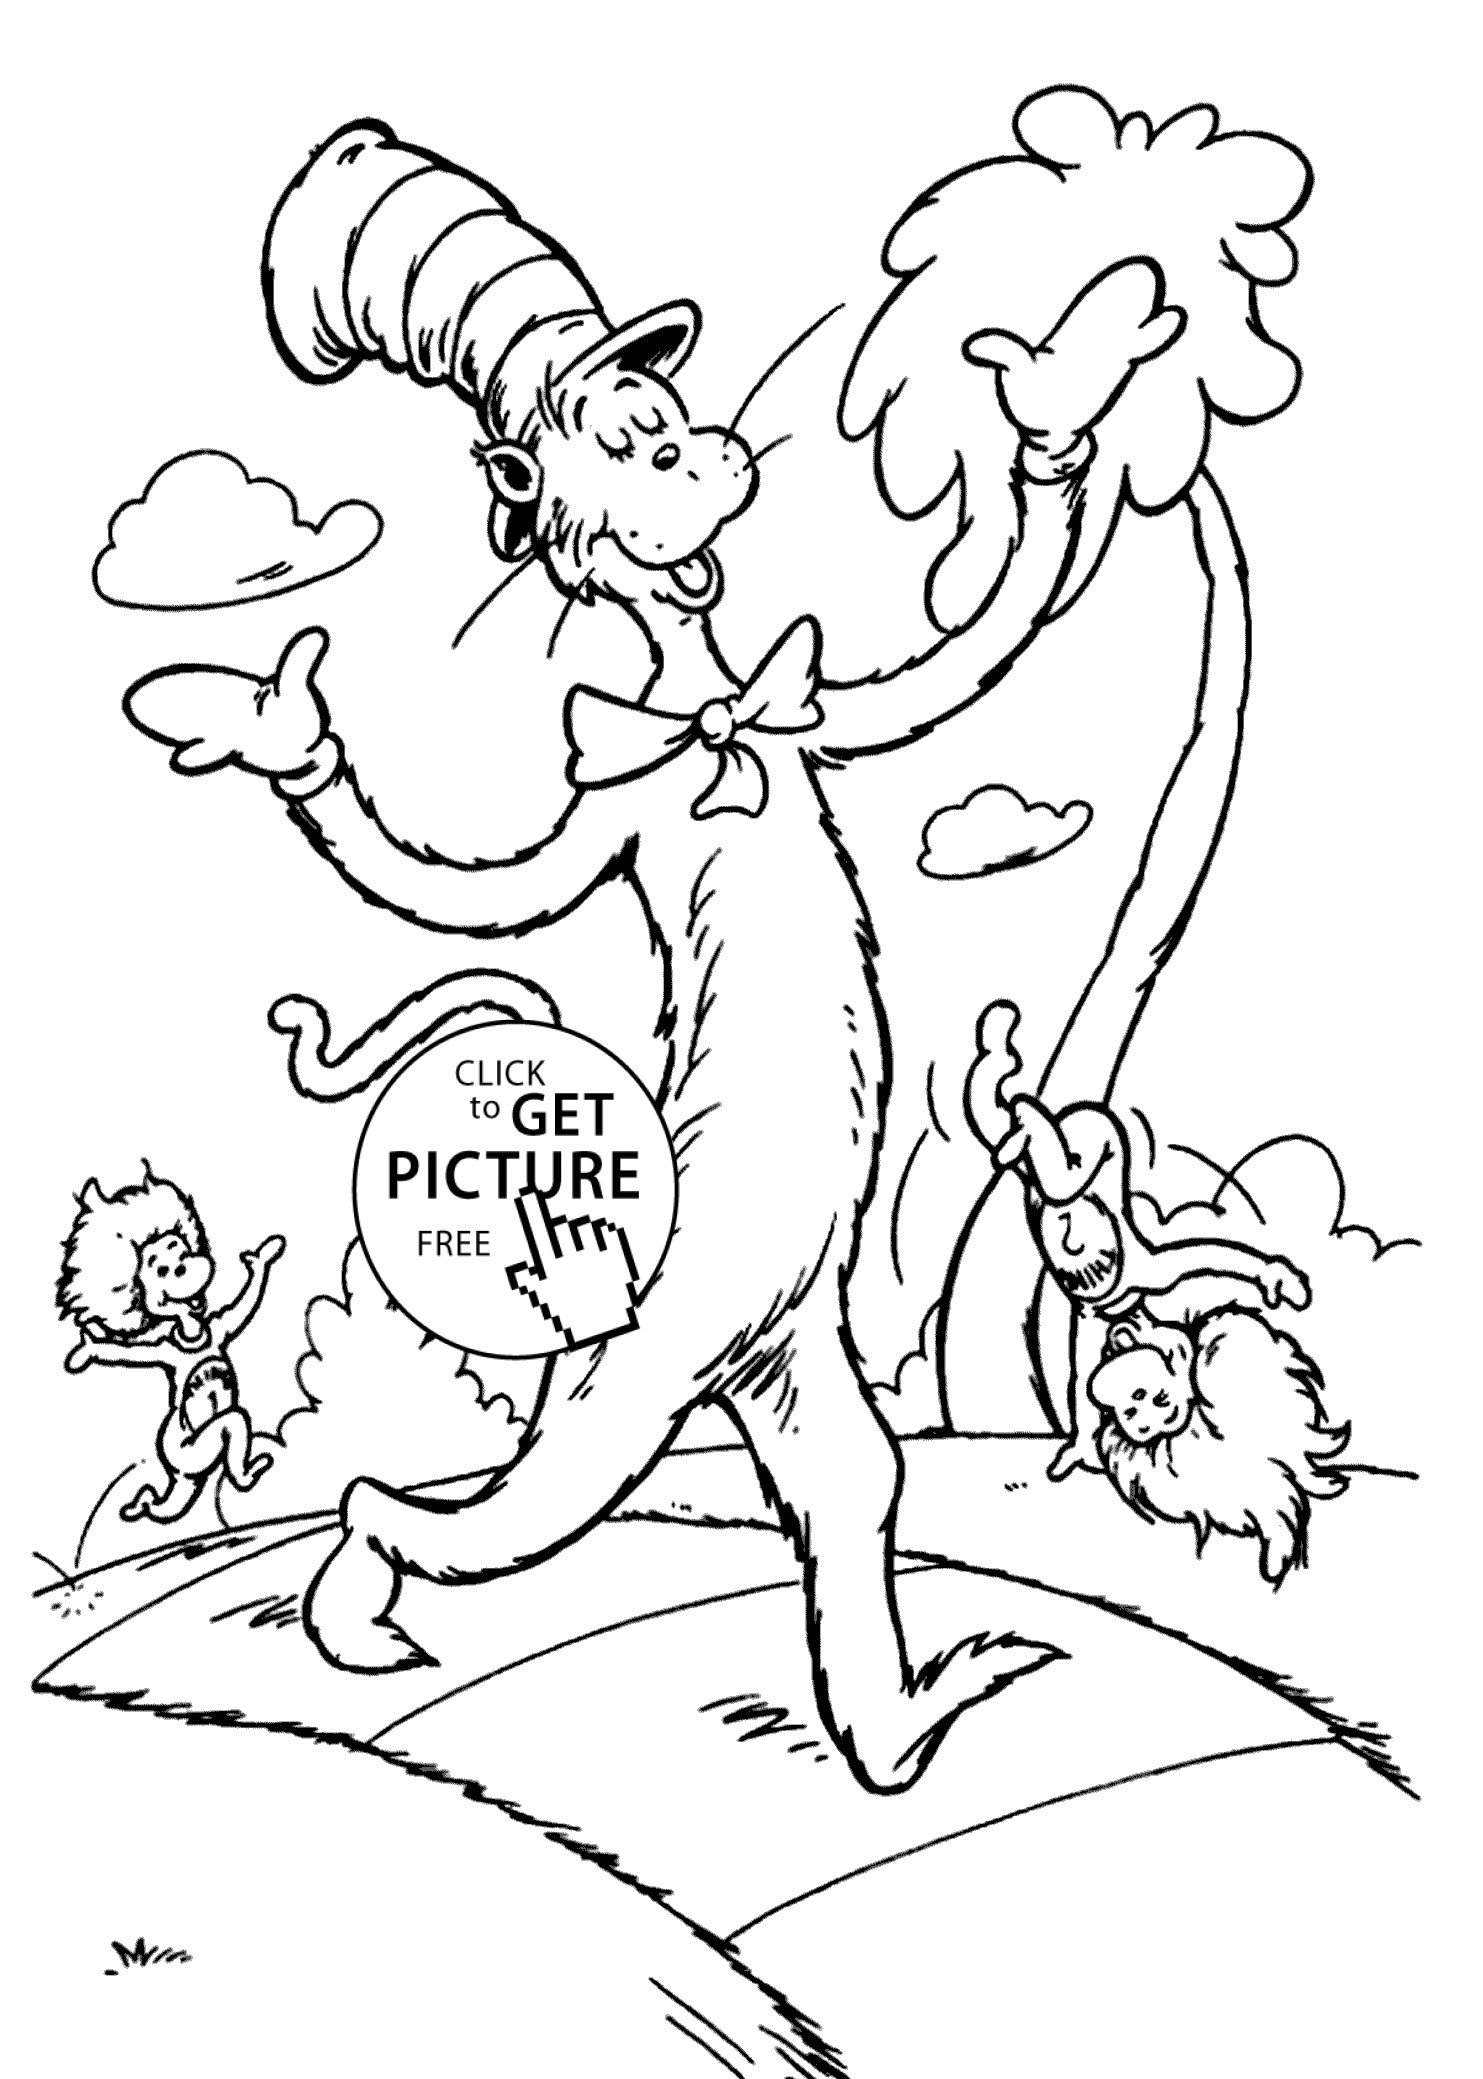 Free Dr Seuss Coloring Sheets For Kids
 The Сat in the hat and promenade coloring pages for kids